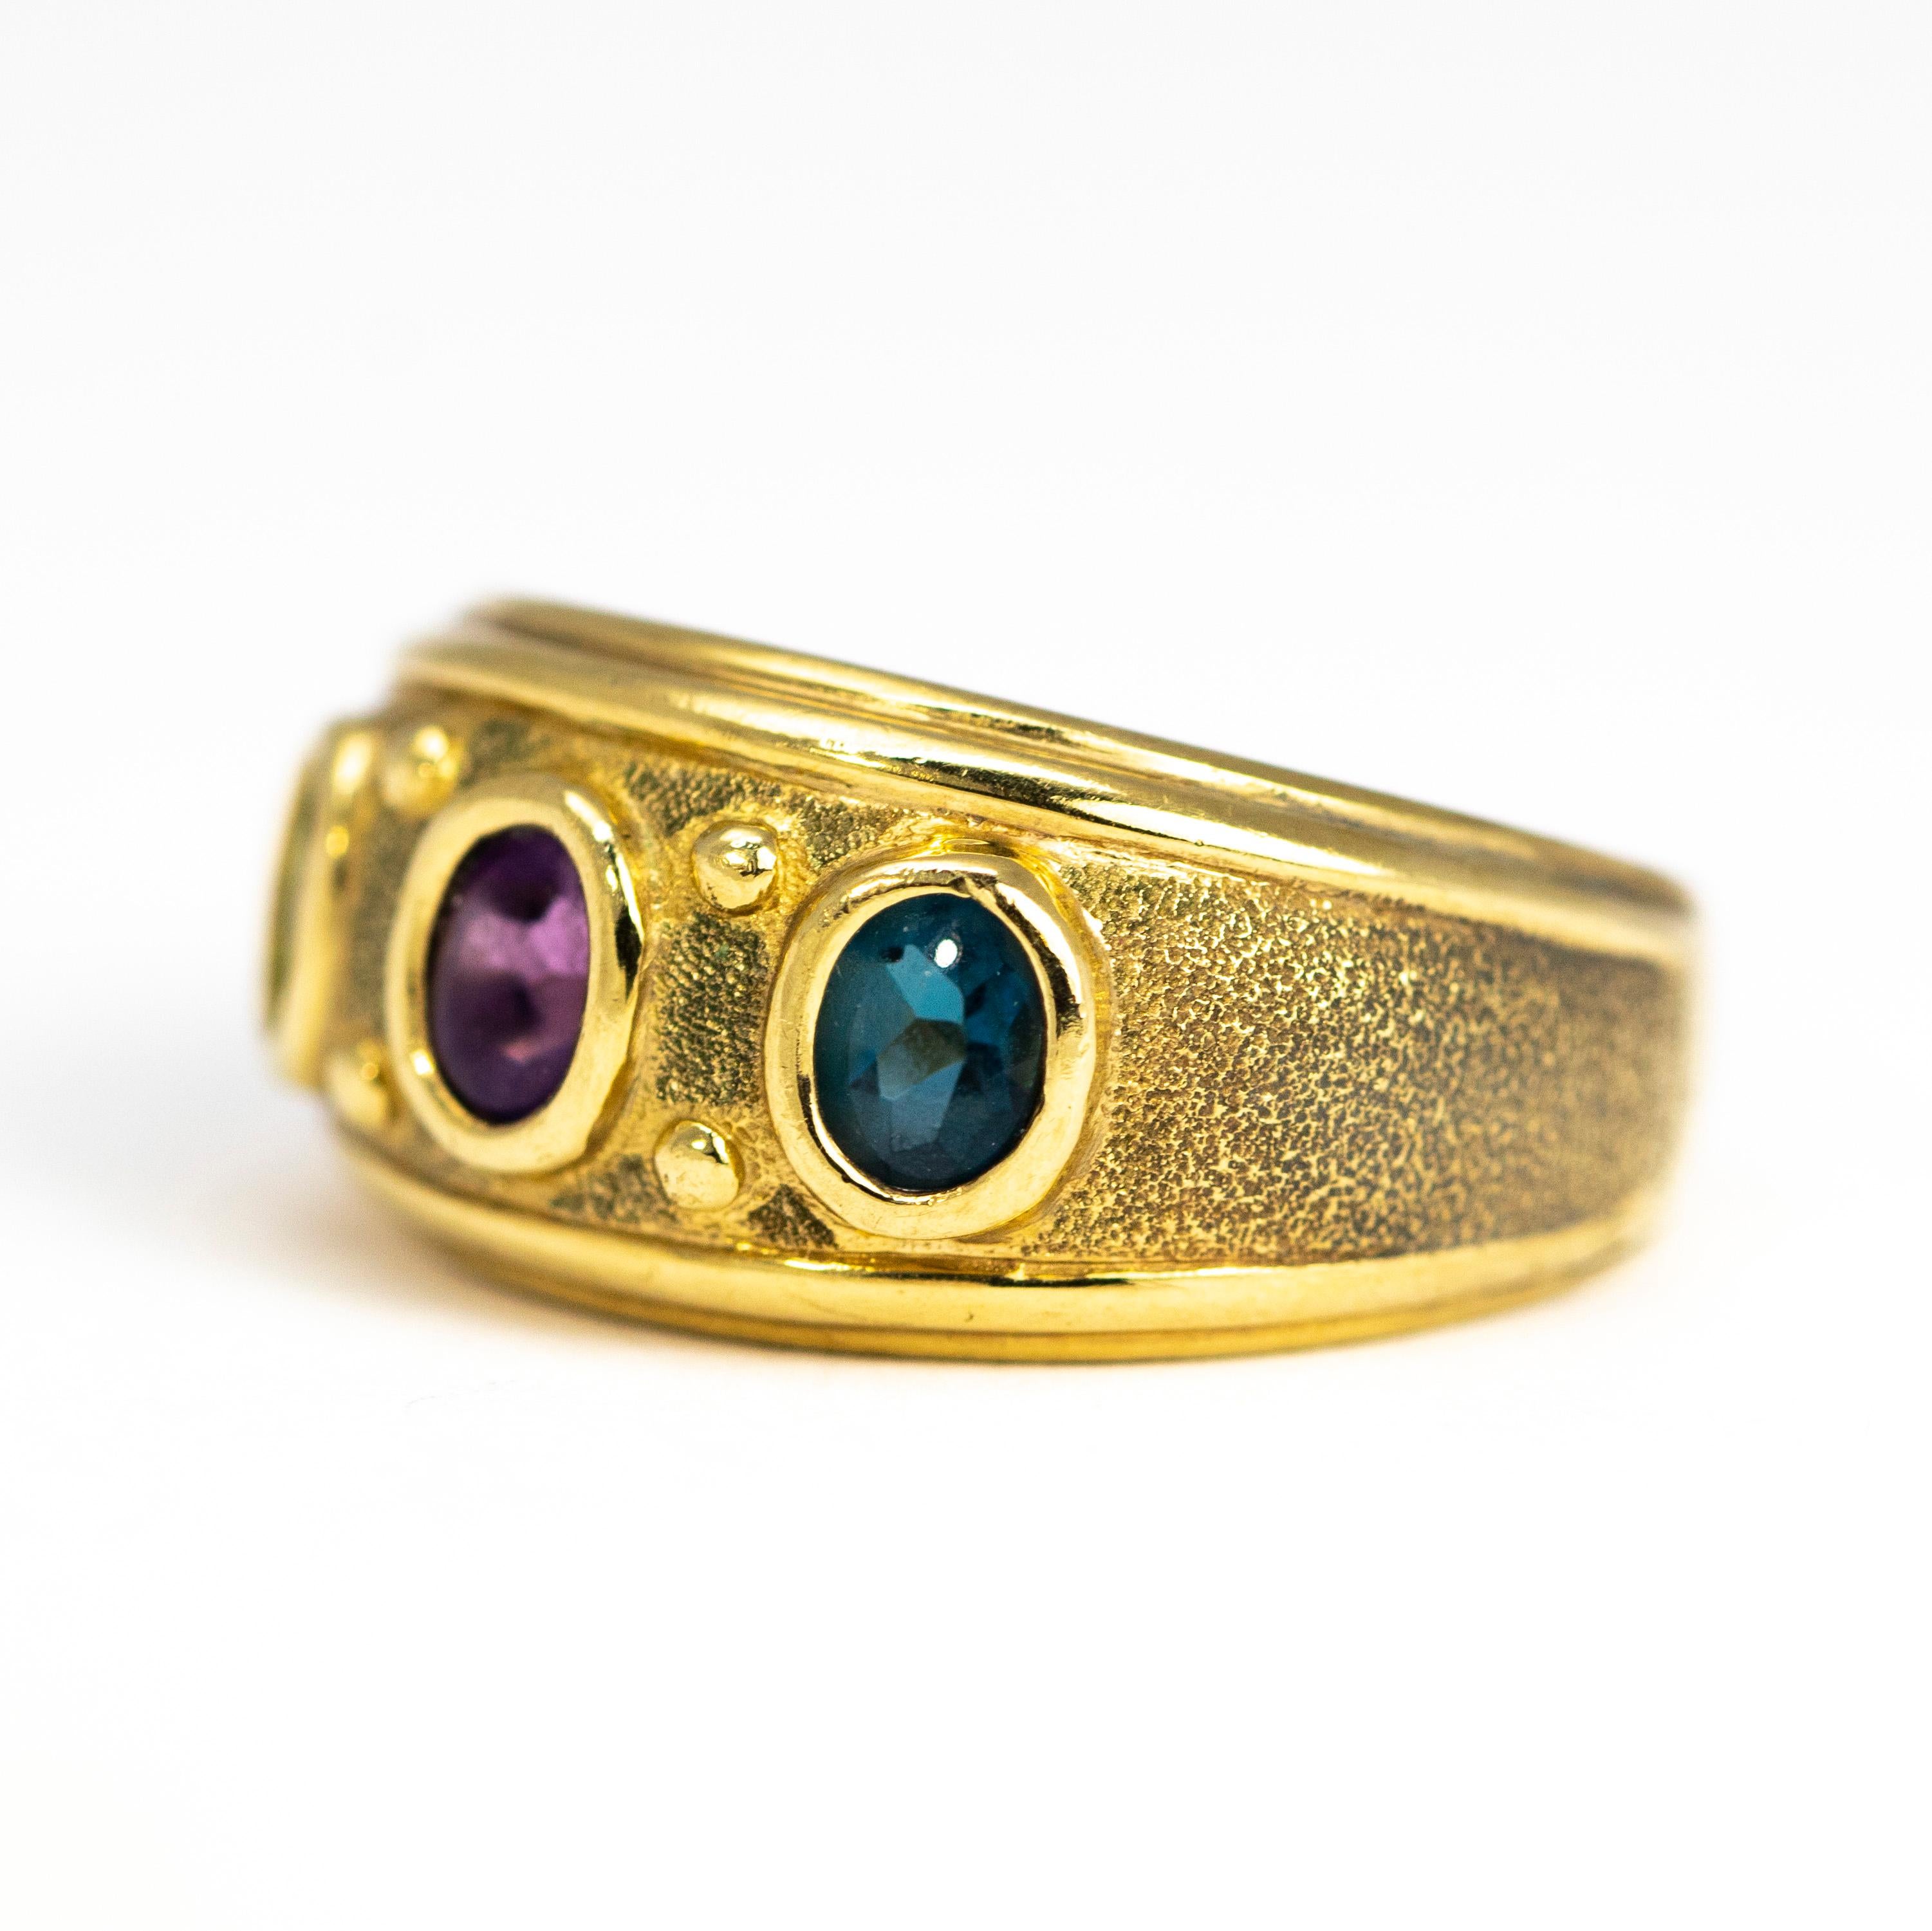 This stylish and chunky band ring holds three different coloured tourmaline stones measuring 40pts each. The stones are striking blue, deep purple and bright green. Surrounding the stone is textured gold and the outer edges are smooth and glossy.